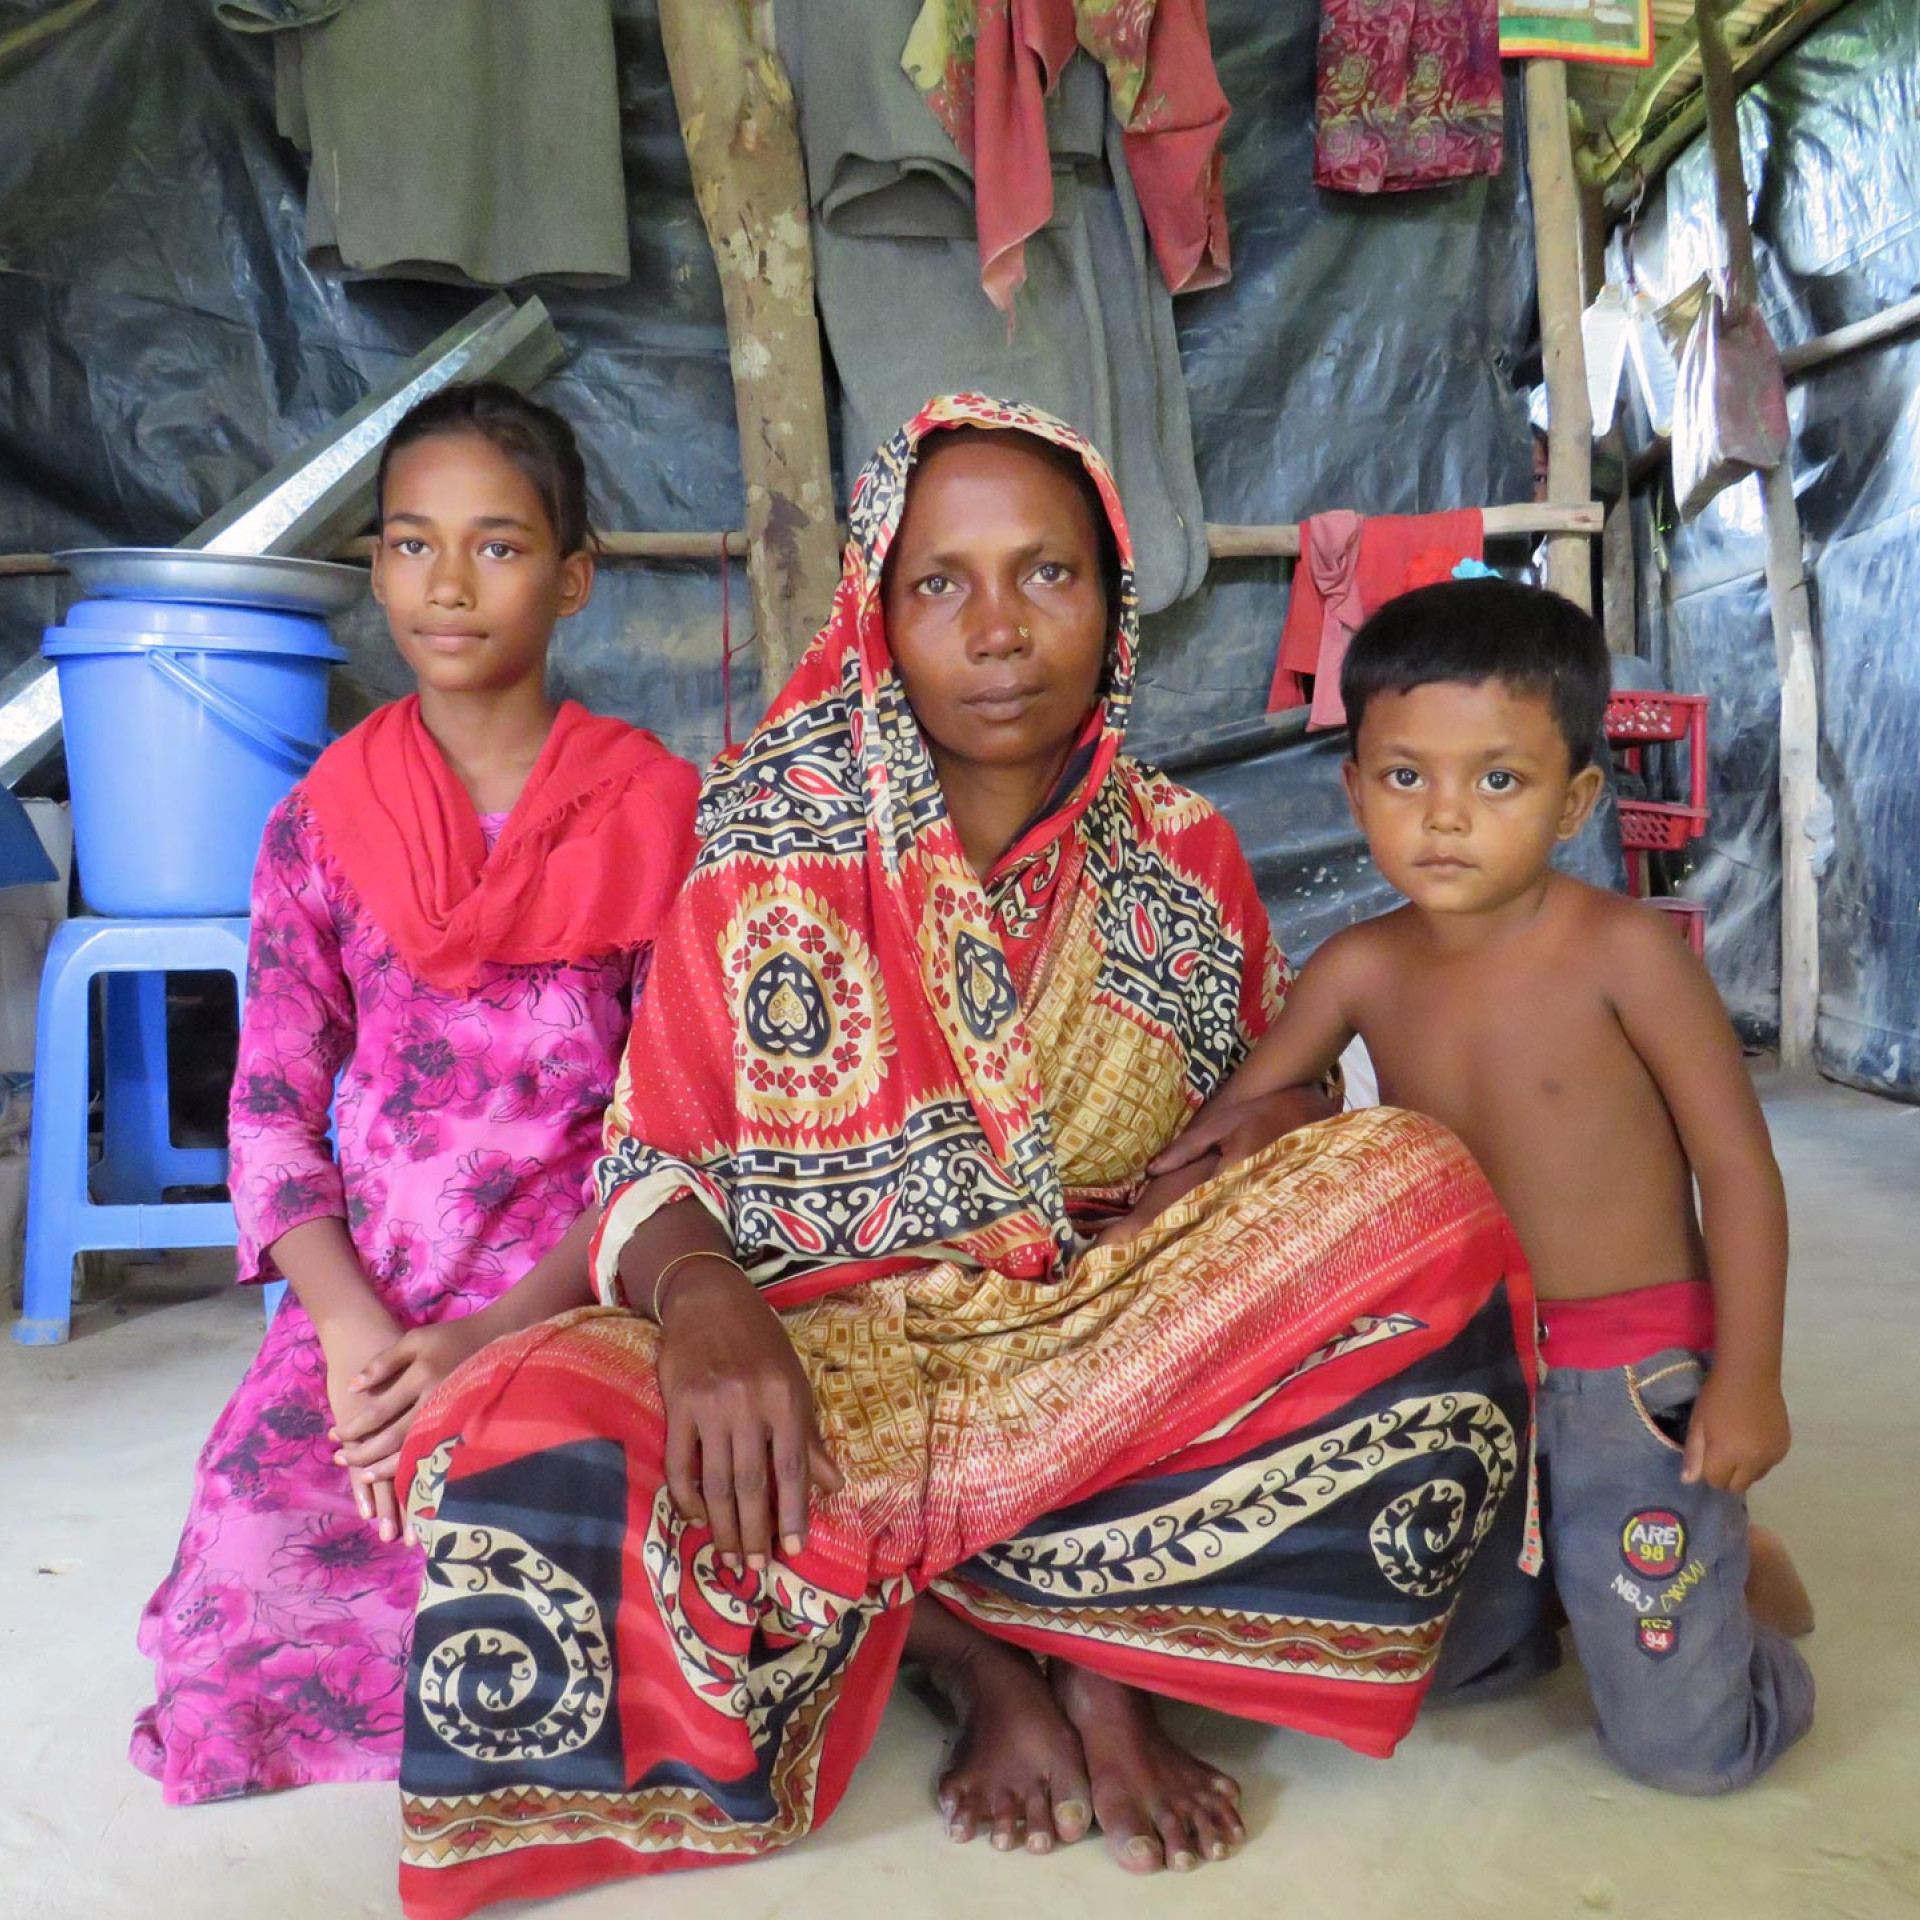 Khotija and her children sit inside their home.